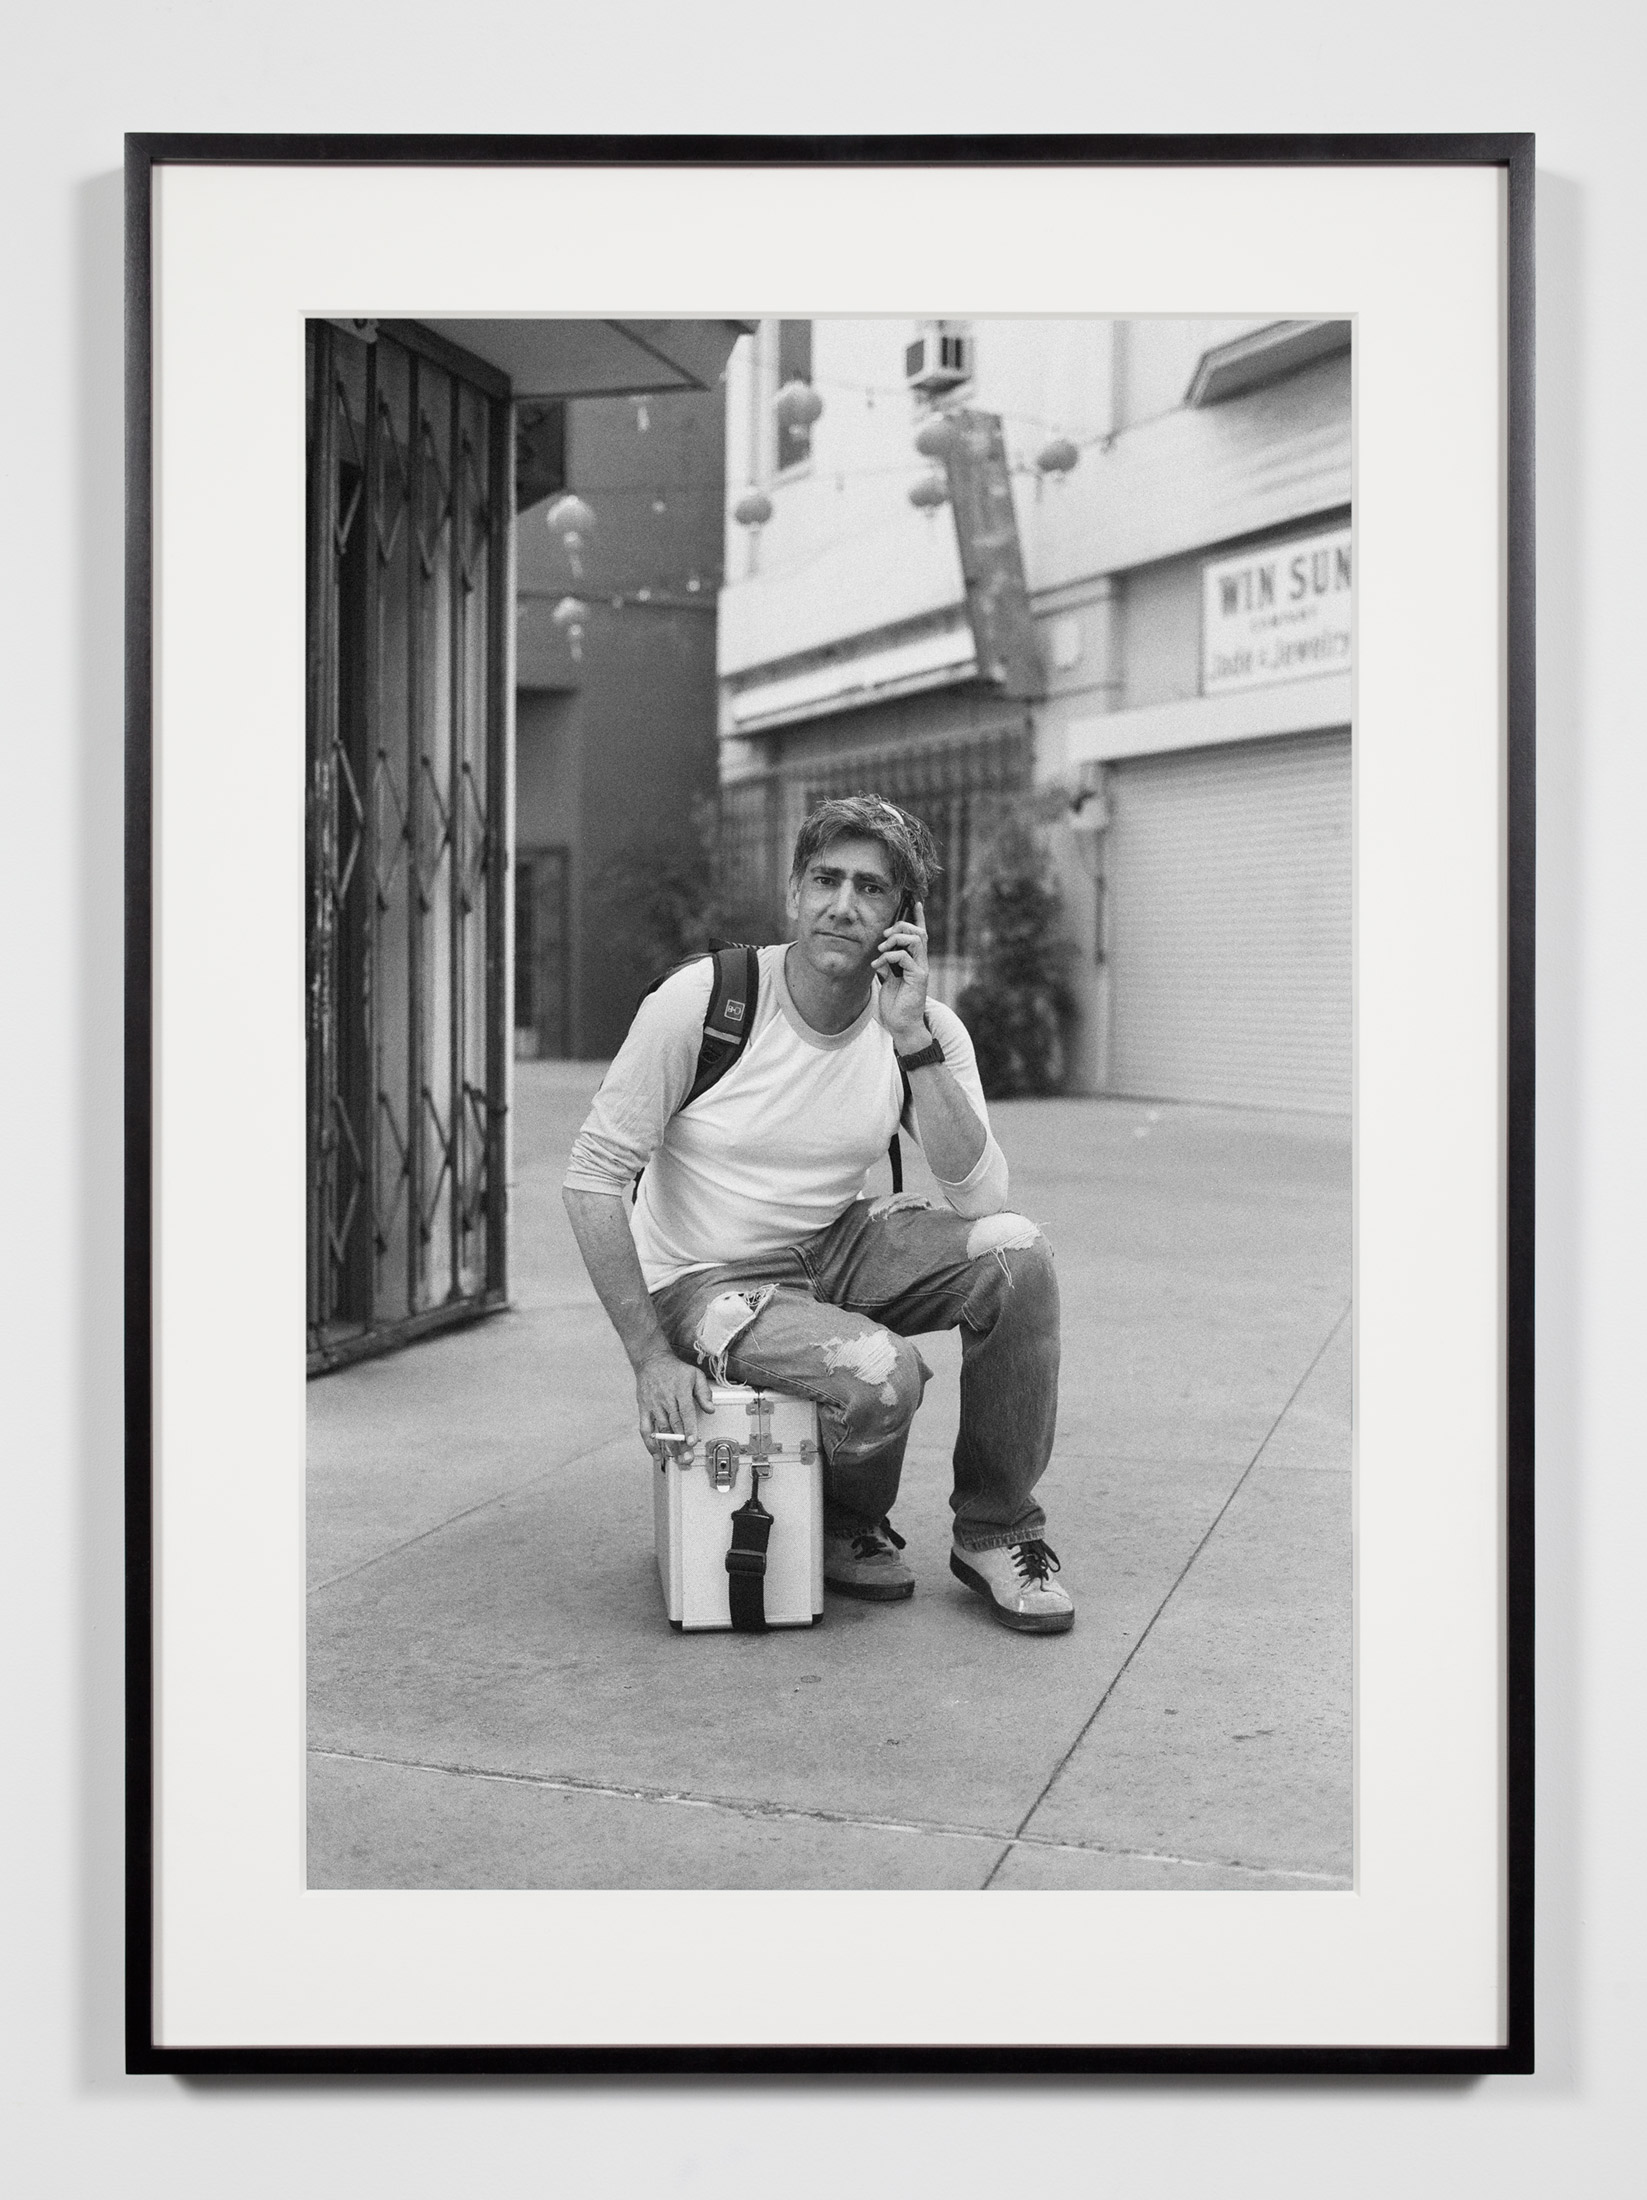   Gallery Preparator, Los Angeles, California, July 26, 2008   2011  Epson Ultrachrome K3 archival ink jet print on Hahnemühle Photo Rag paper  36 3/8 x 26 3/8 inches   Industrial Portraits, 2008–    A Diagram of Forces, 2011     